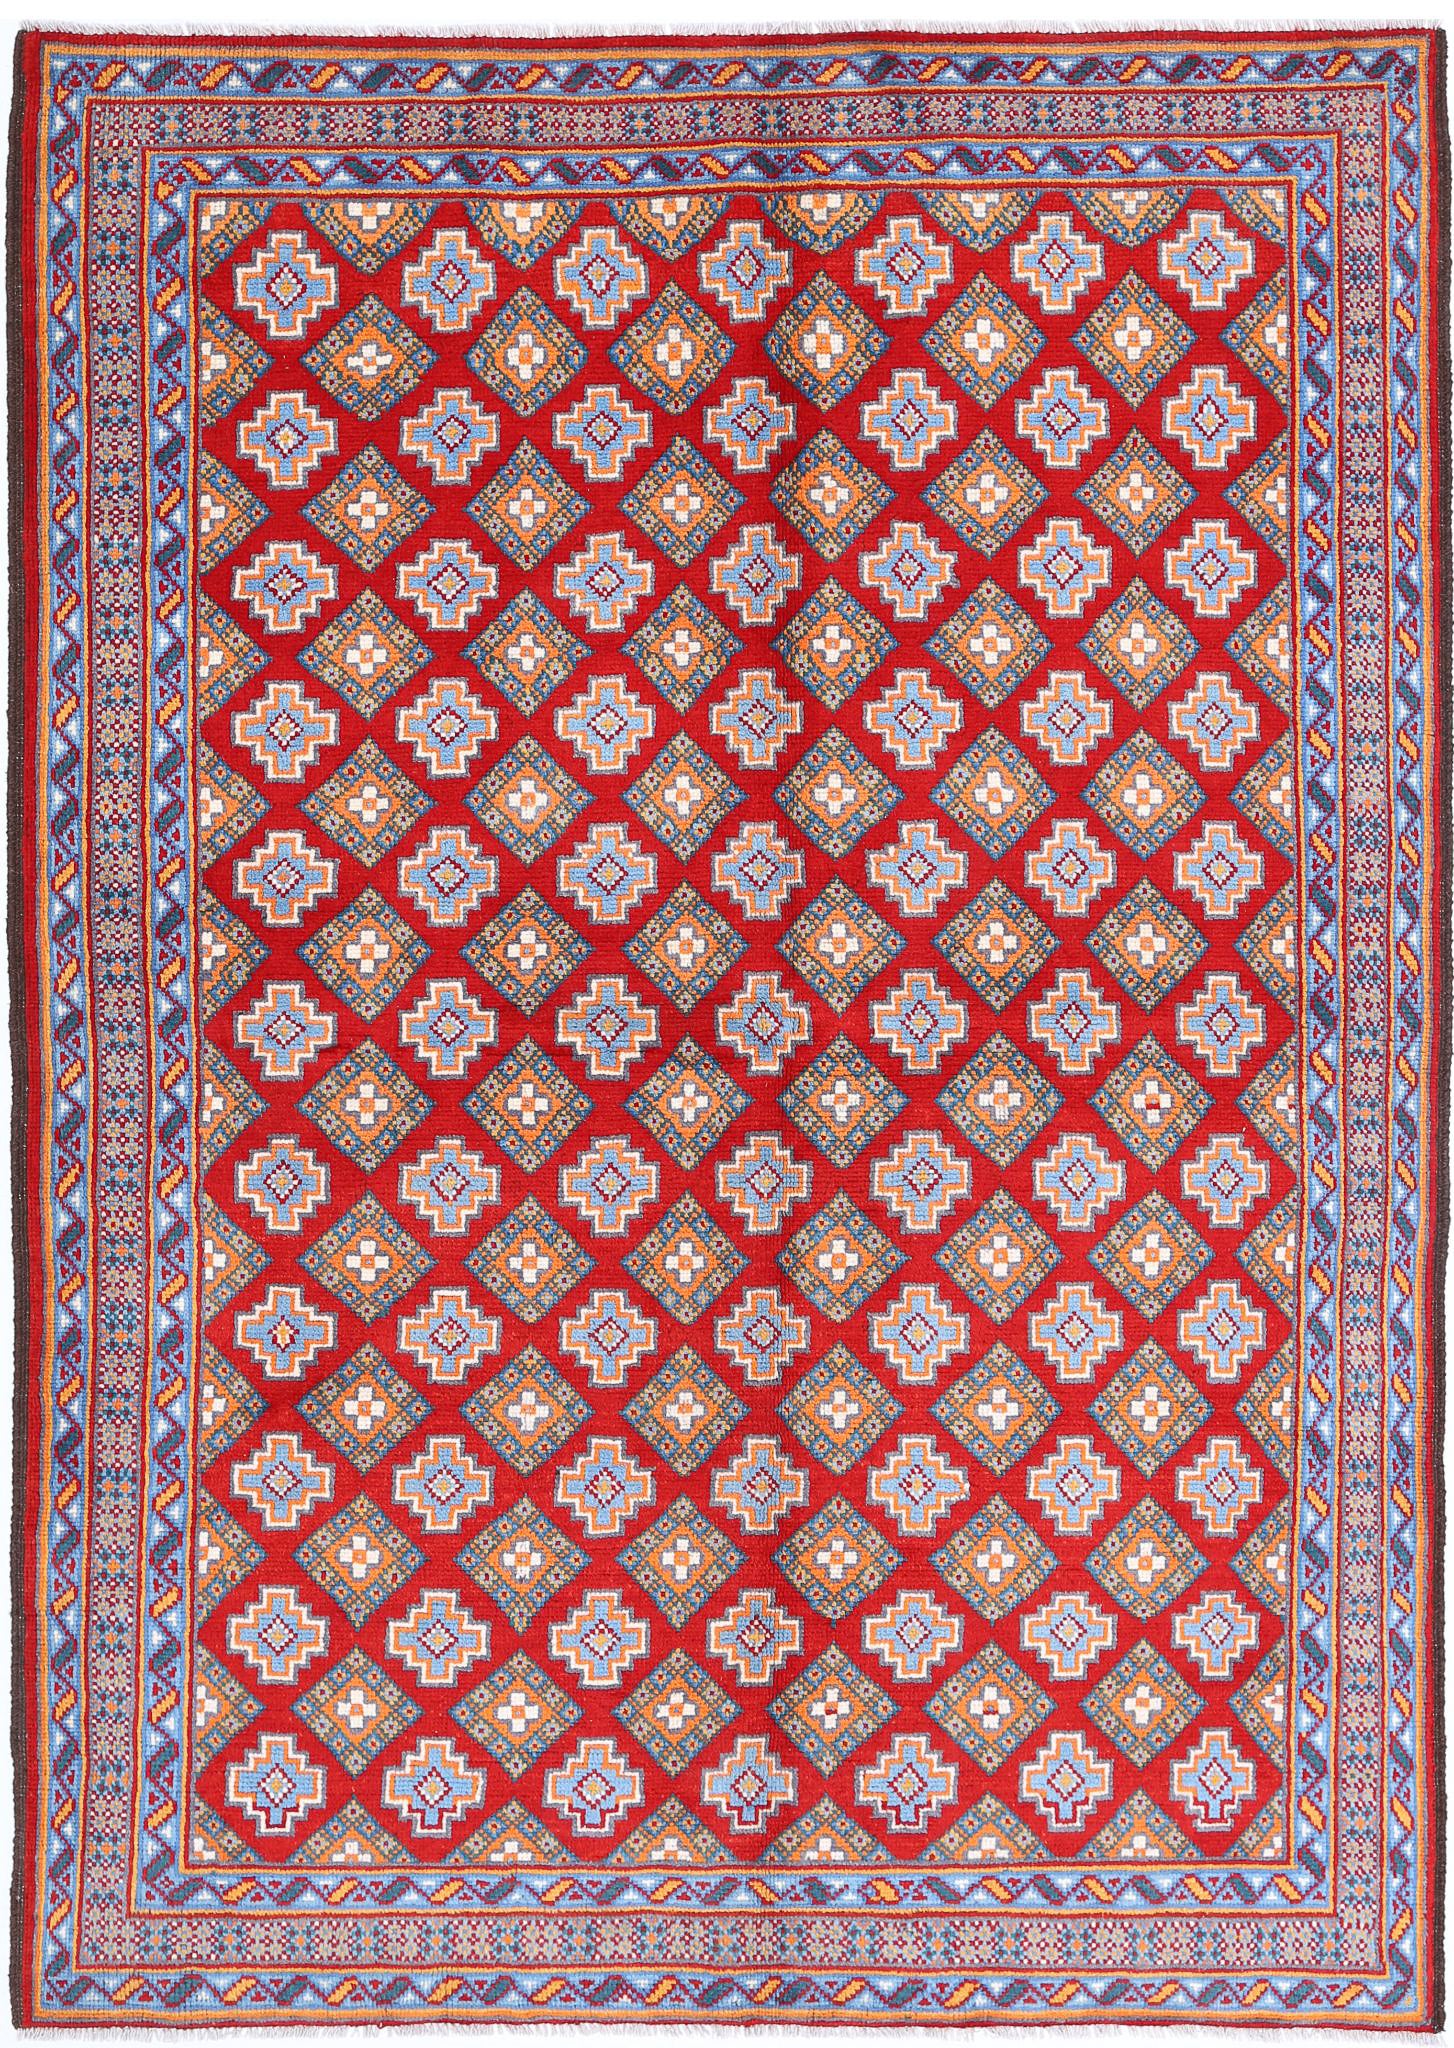 Revival-hand-knotted-qarghani-wool-rug-5014223.jpg